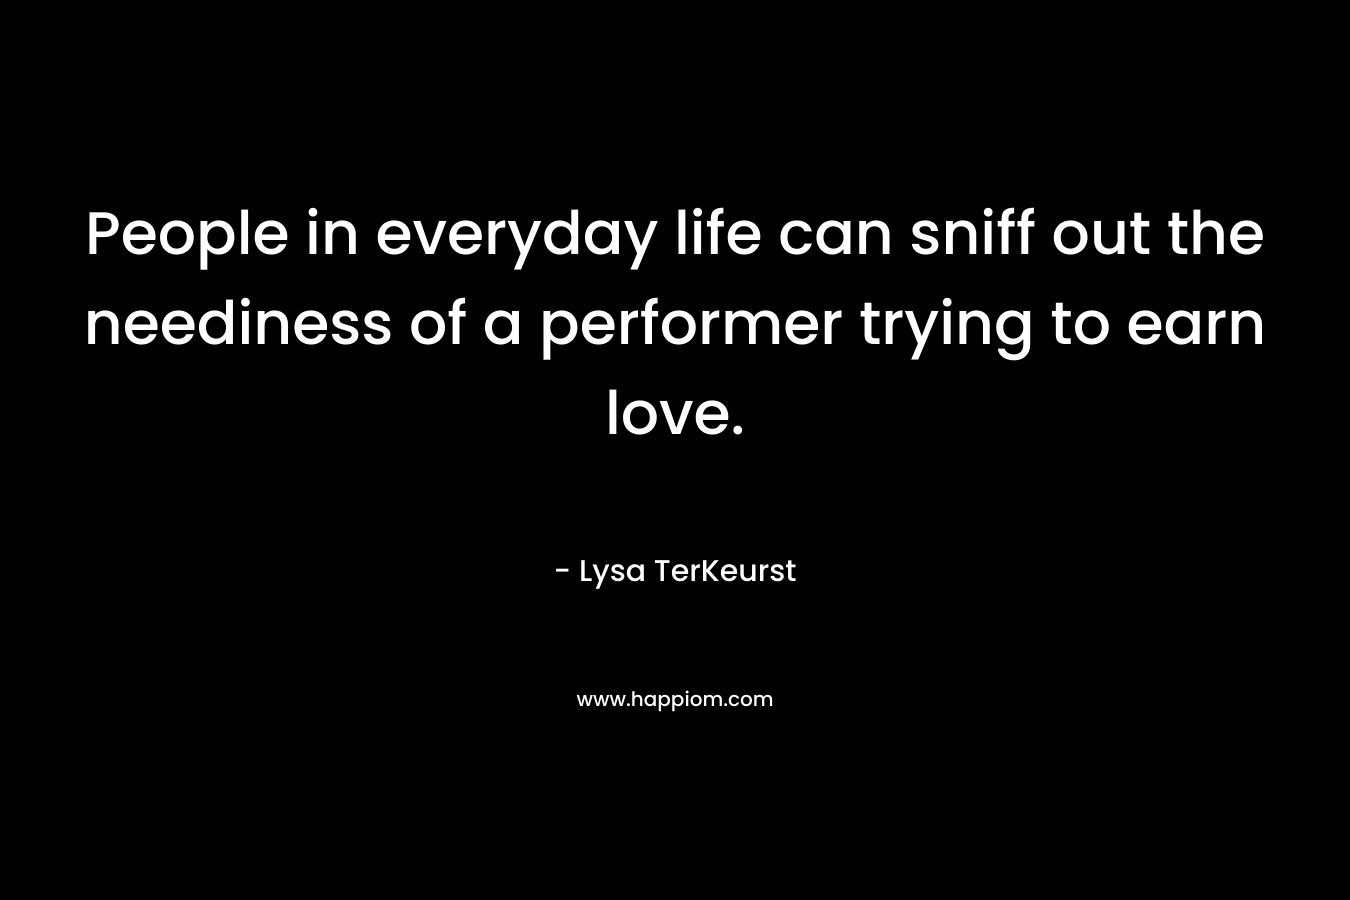 People in everyday life can sniff out the neediness of a performer trying to earn love. – Lysa TerKeurst